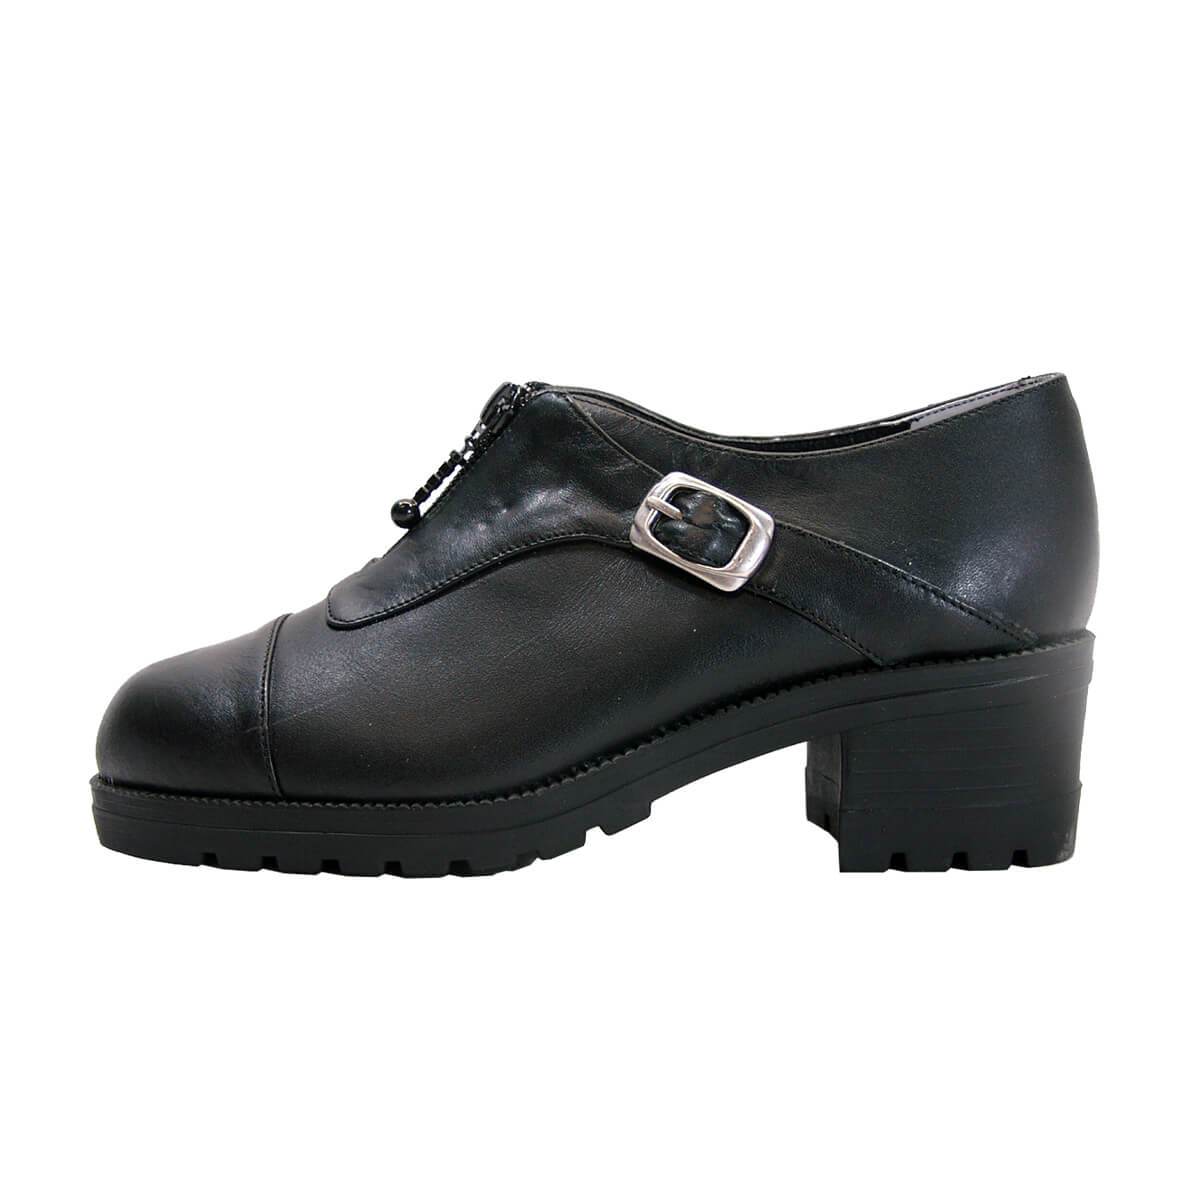 PEERAGE Naya Women's Wide Width Leather Shoes with Zipper